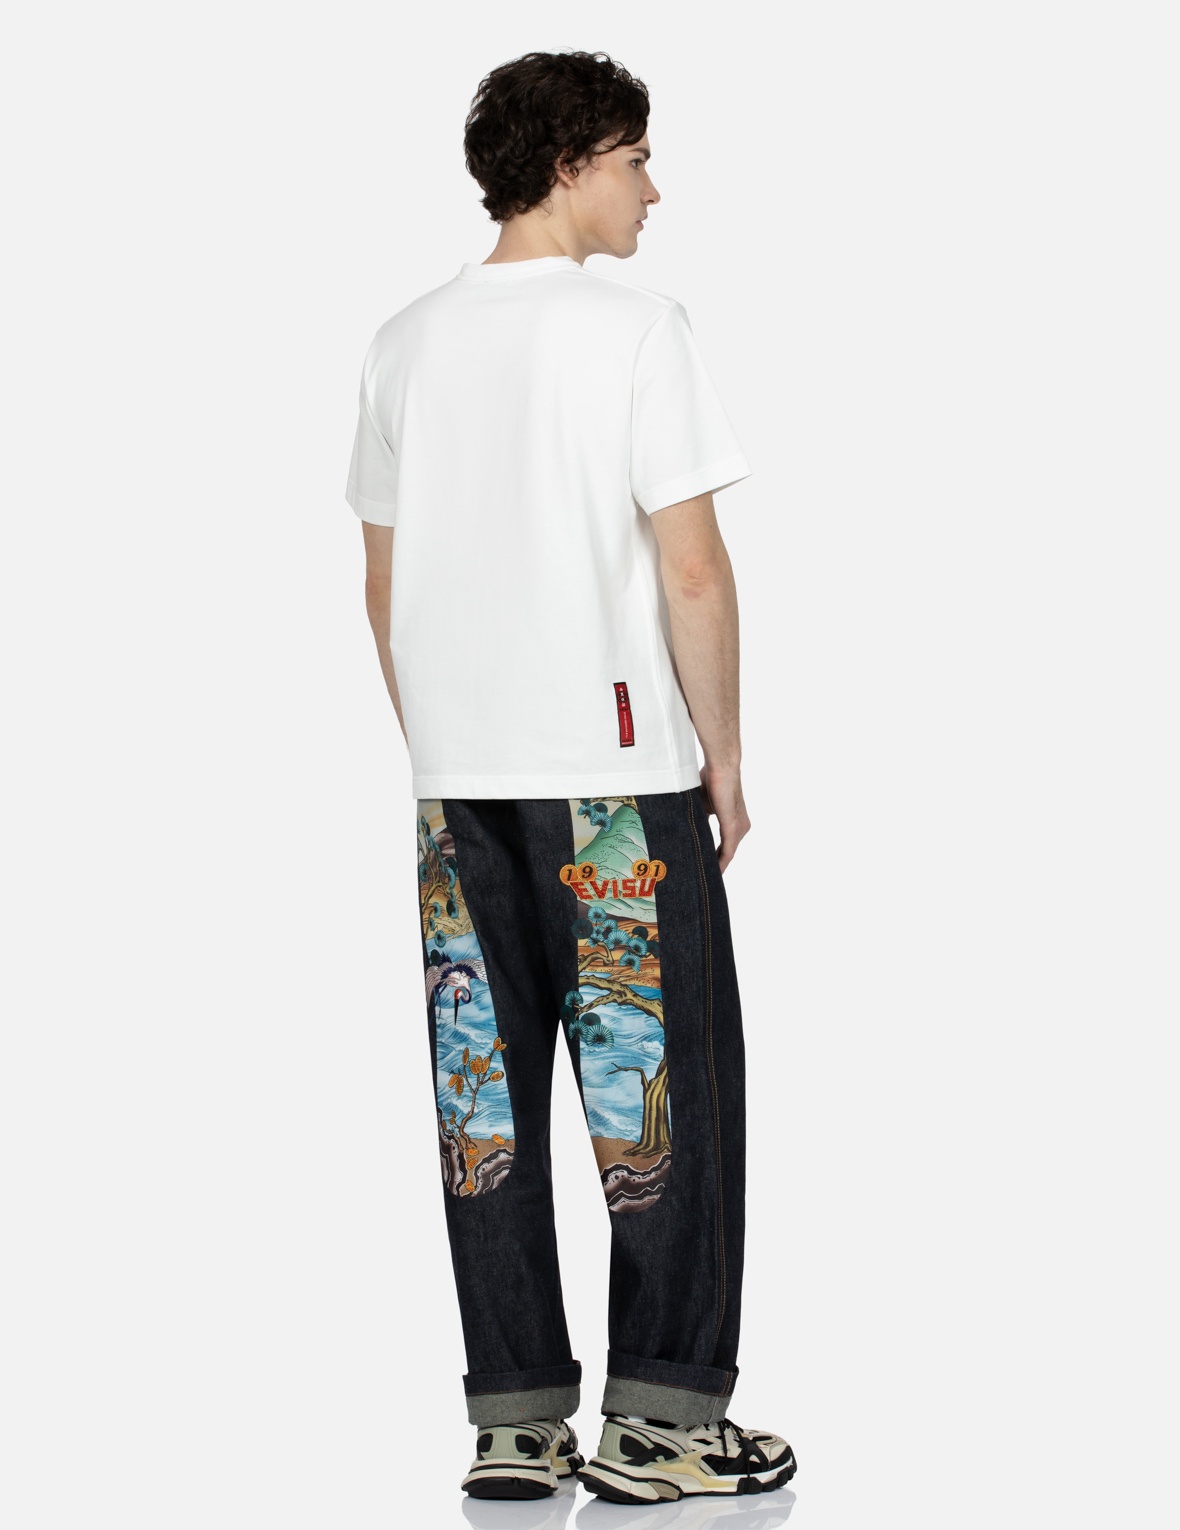 PINE-PATTERN DAICOCK PRINT WITH CRANE AND LOGO EMBROIDERY WIDE LEG JEANS - 3